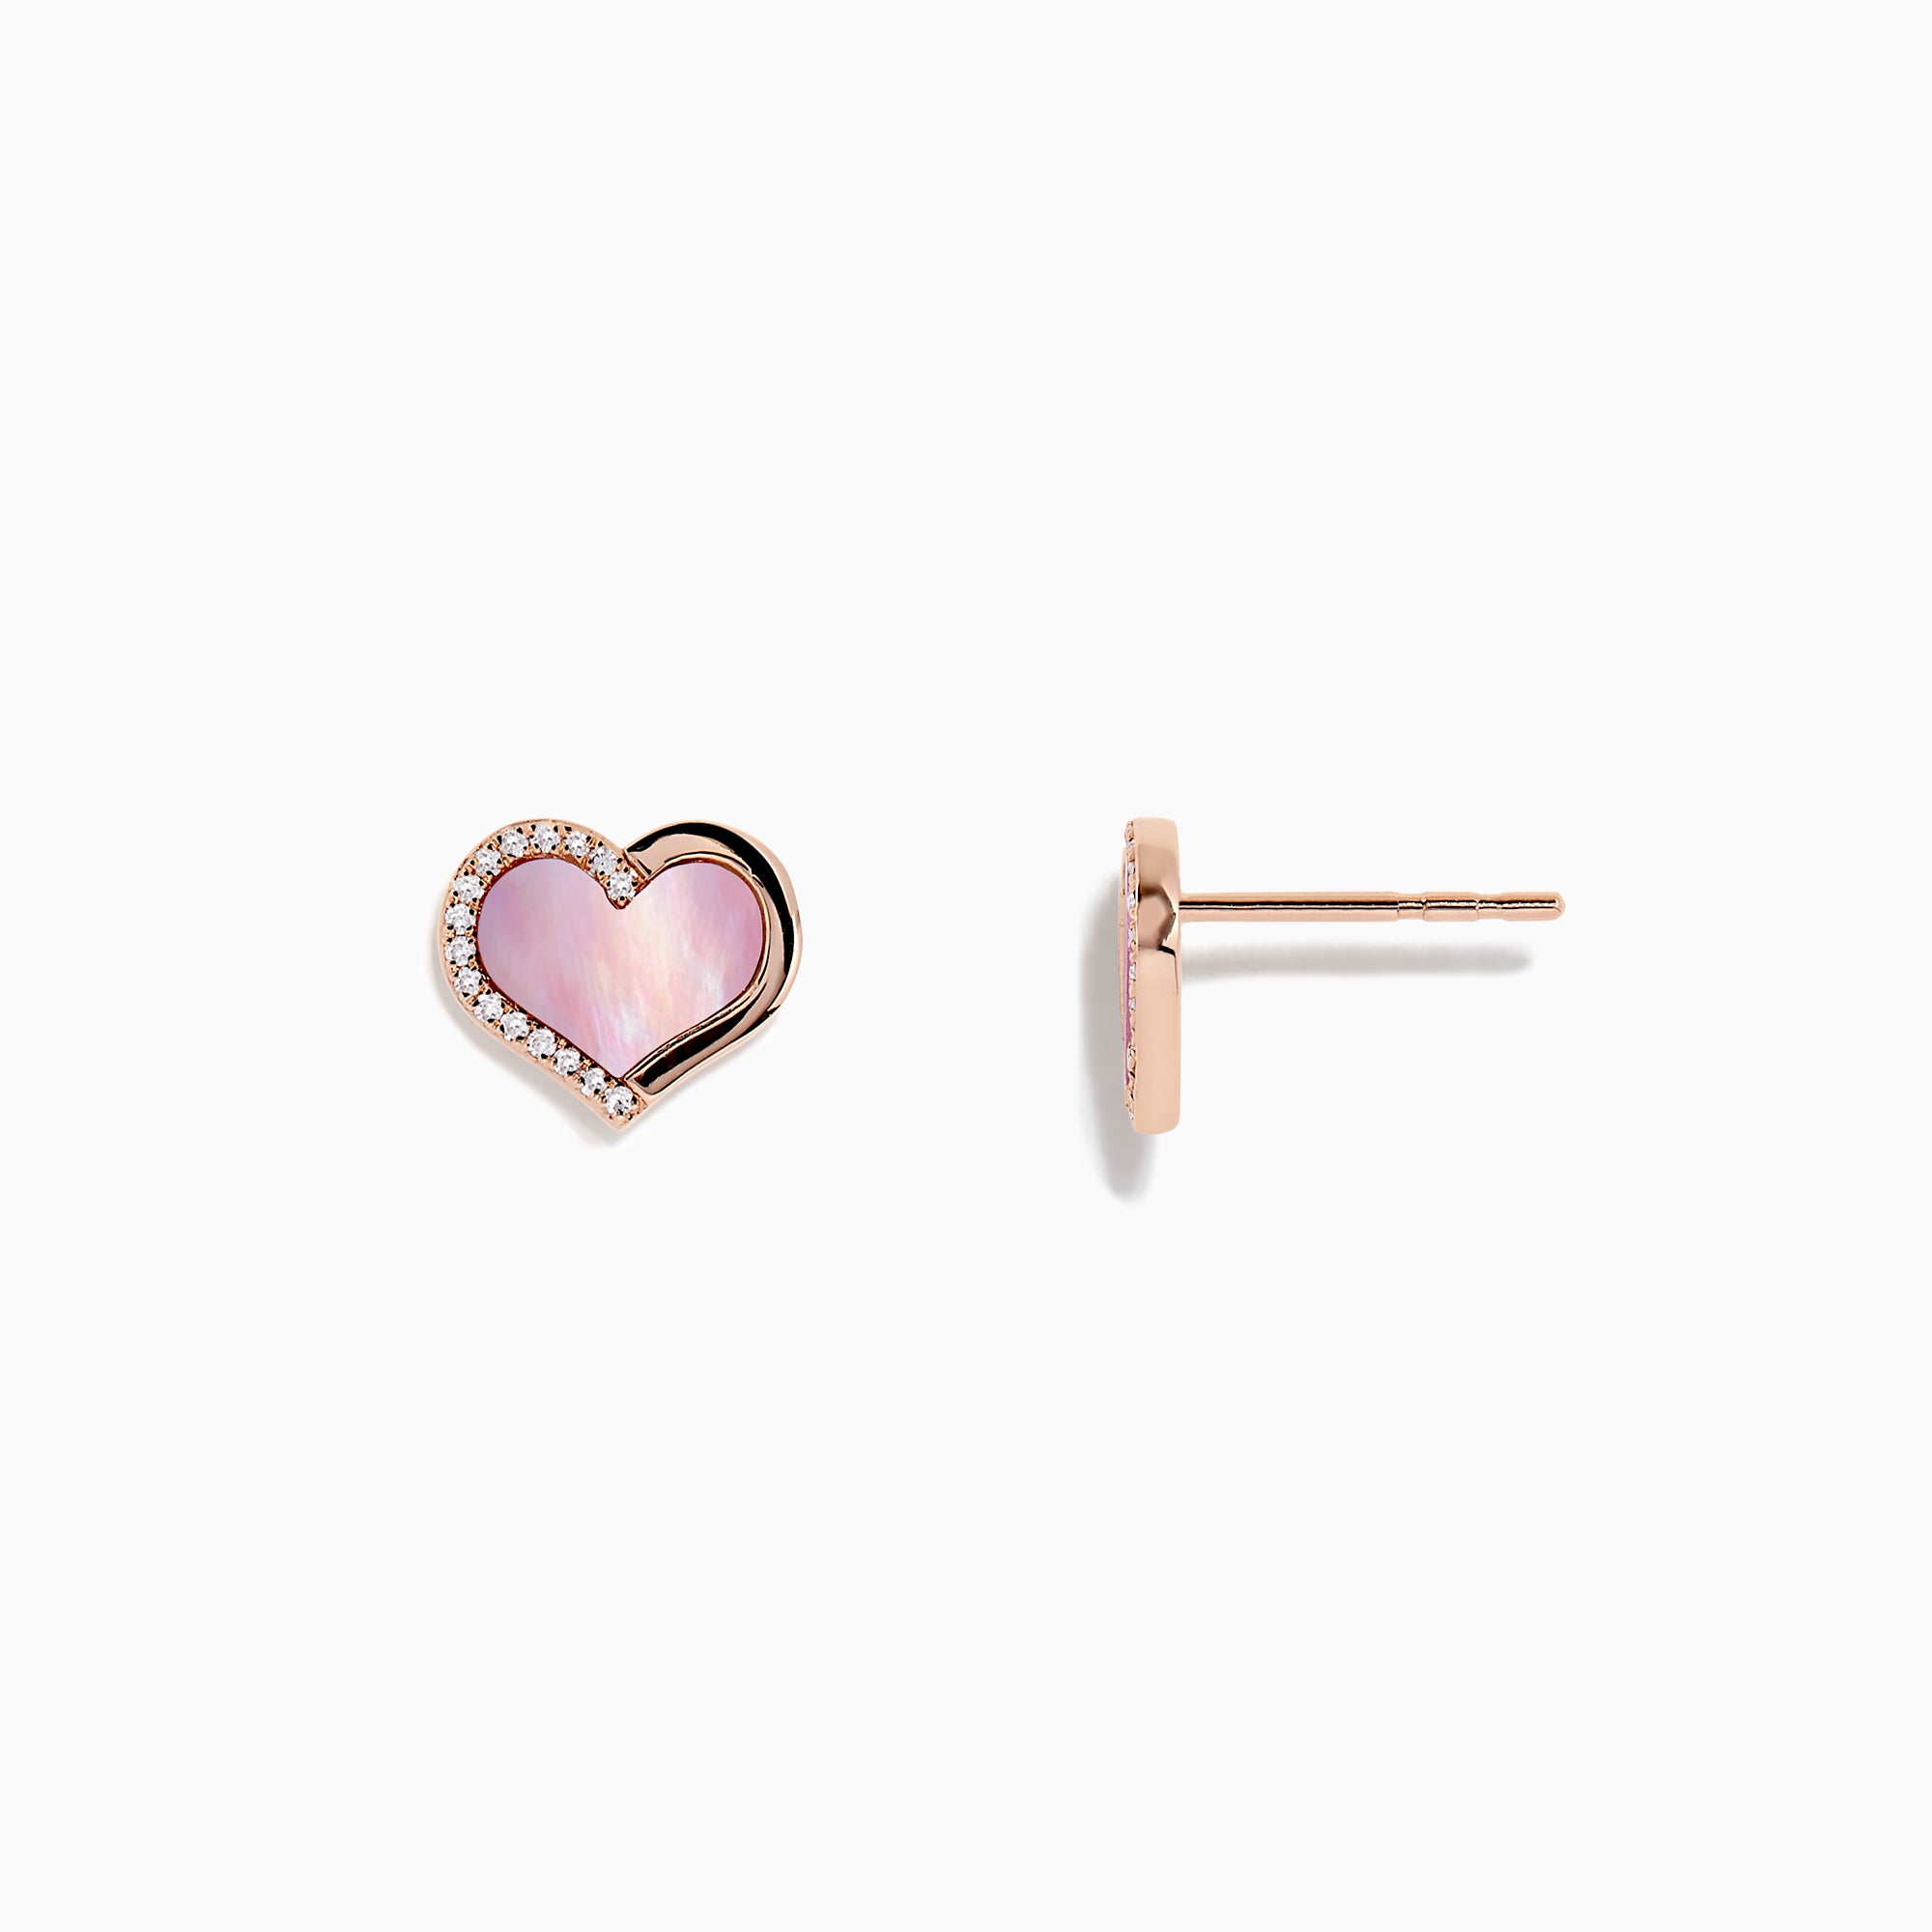 Effy 14K Rose Gold Mother of Pearl and Diamond Heart Earrings, 0.08 TCW